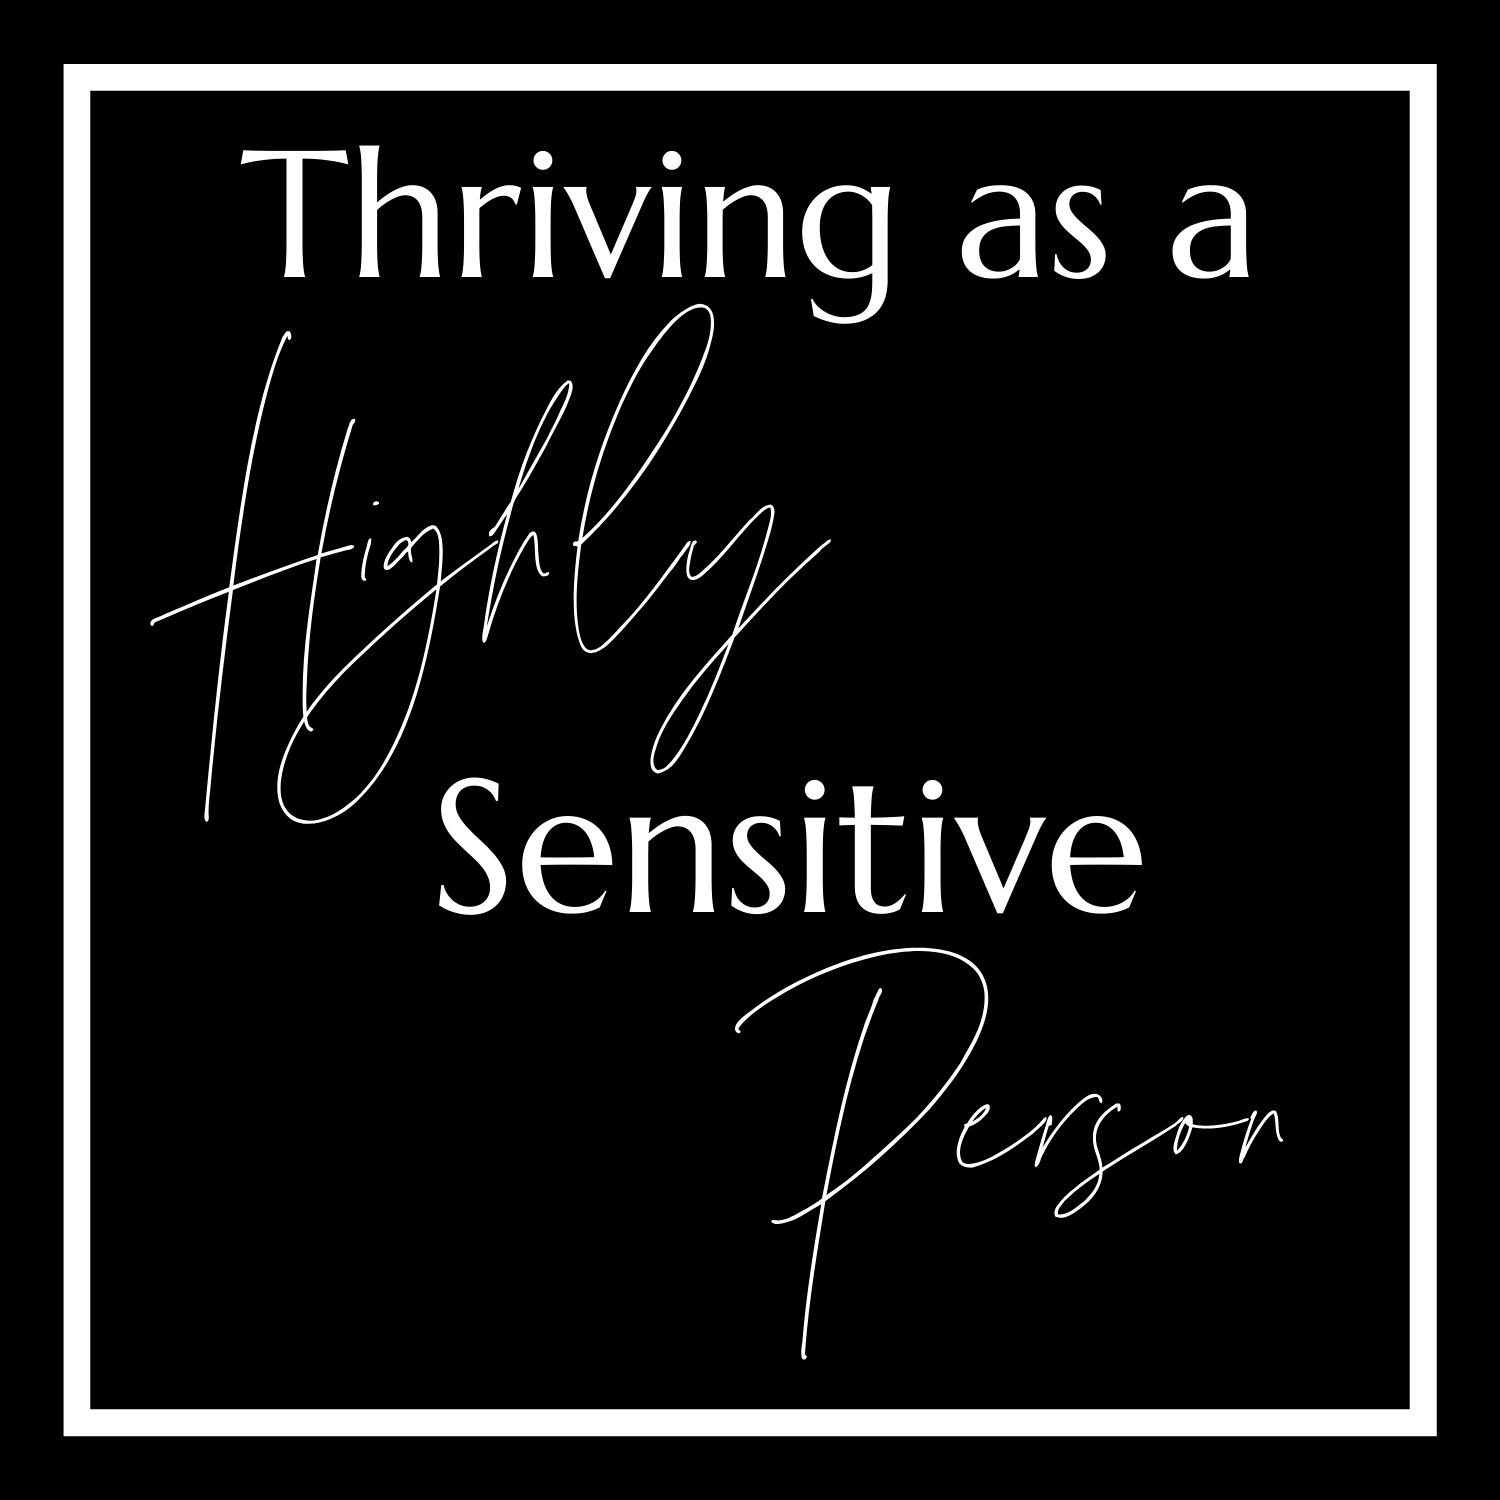 Thriving As A Highly Sensitive Person